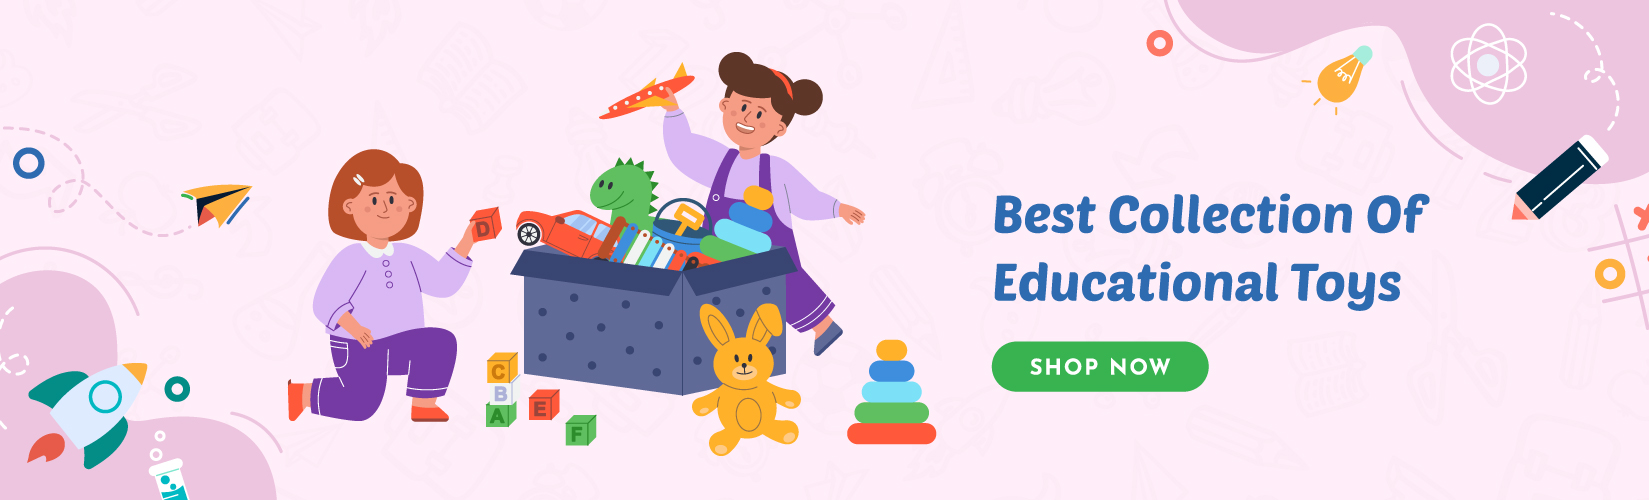 Best Collection Of Education Toys